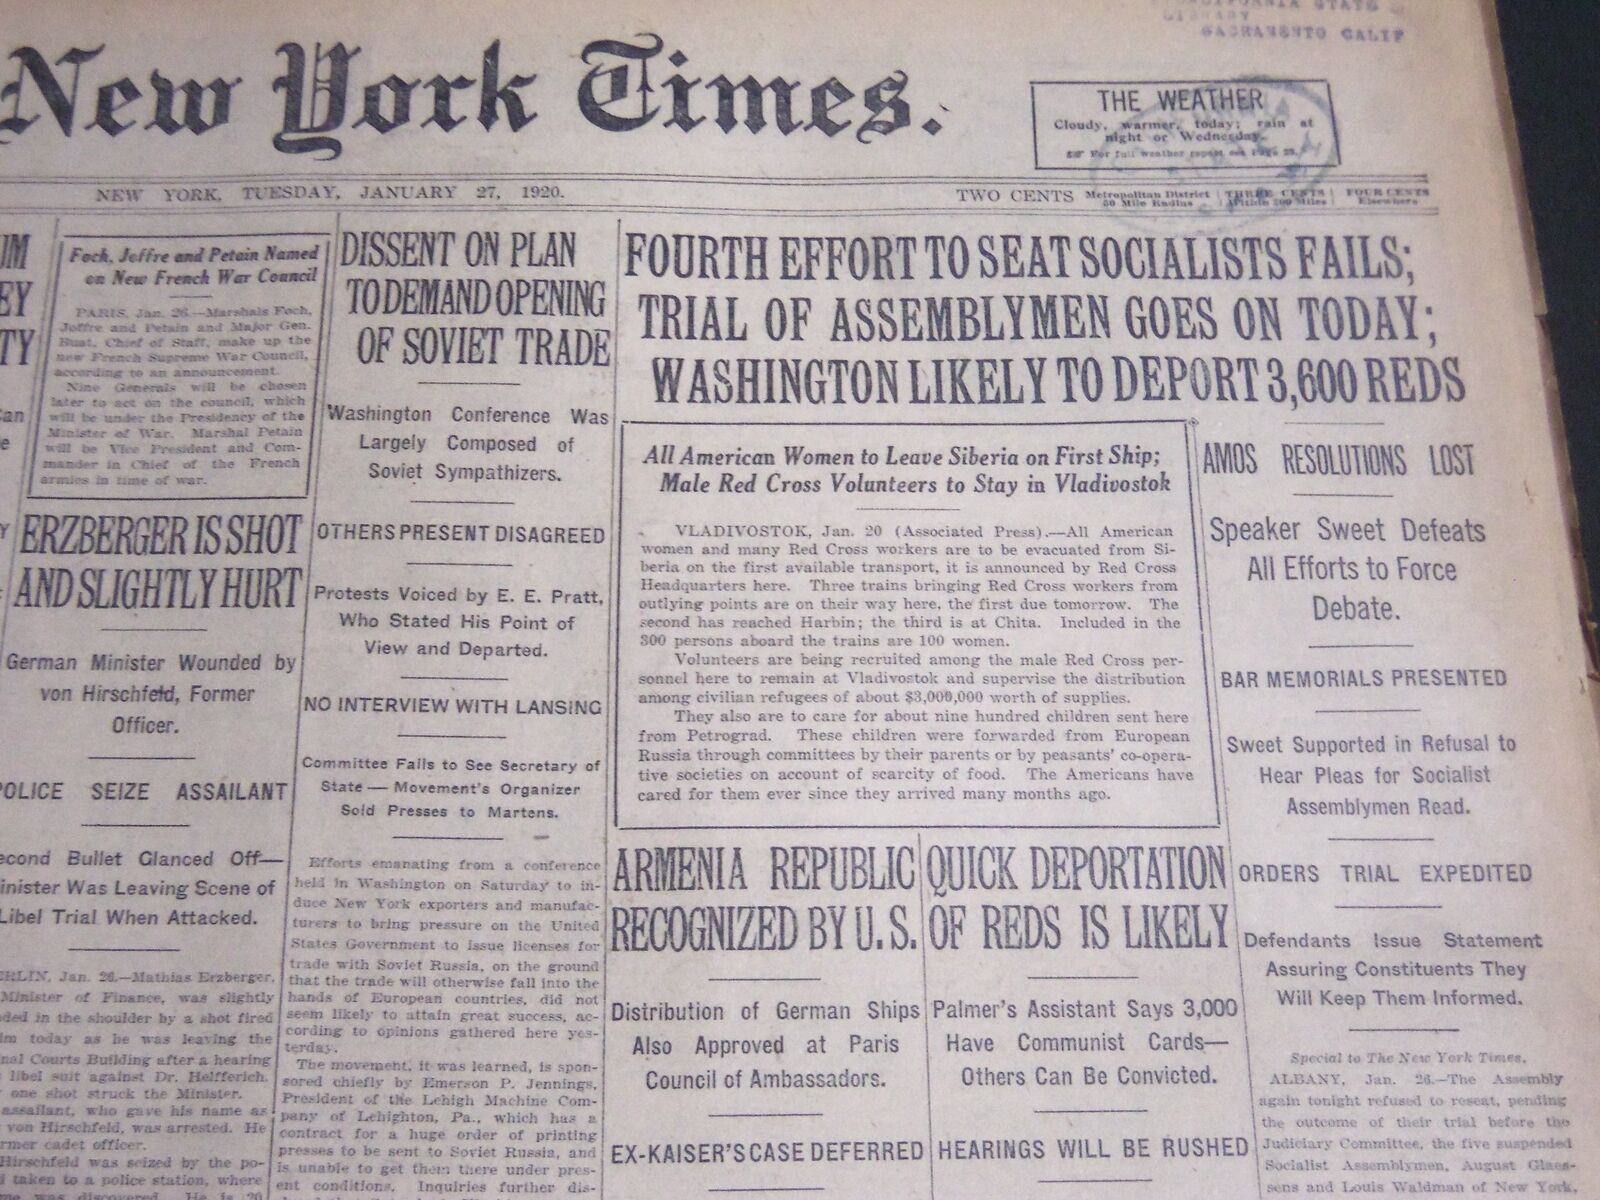 1920 JANUARY 27 NEW YORK TIMES - WASHINGTON LIKELY TO REPORT 3,600 REDS- NT 6765